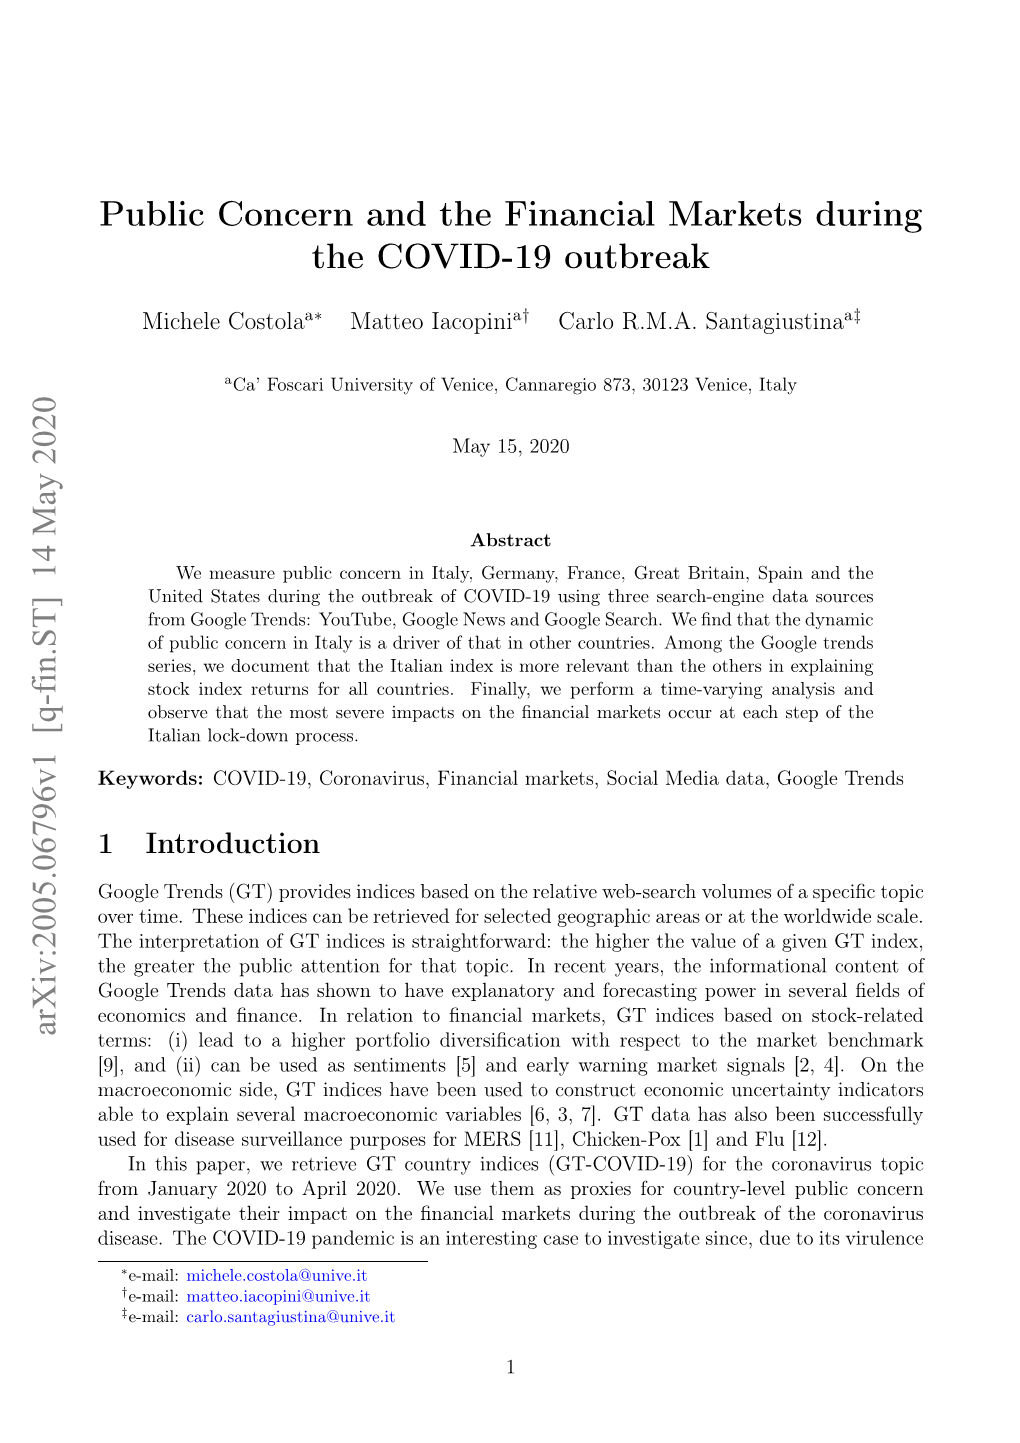 Public Concern and the Financial Markets During the COVID-19 Outbreak